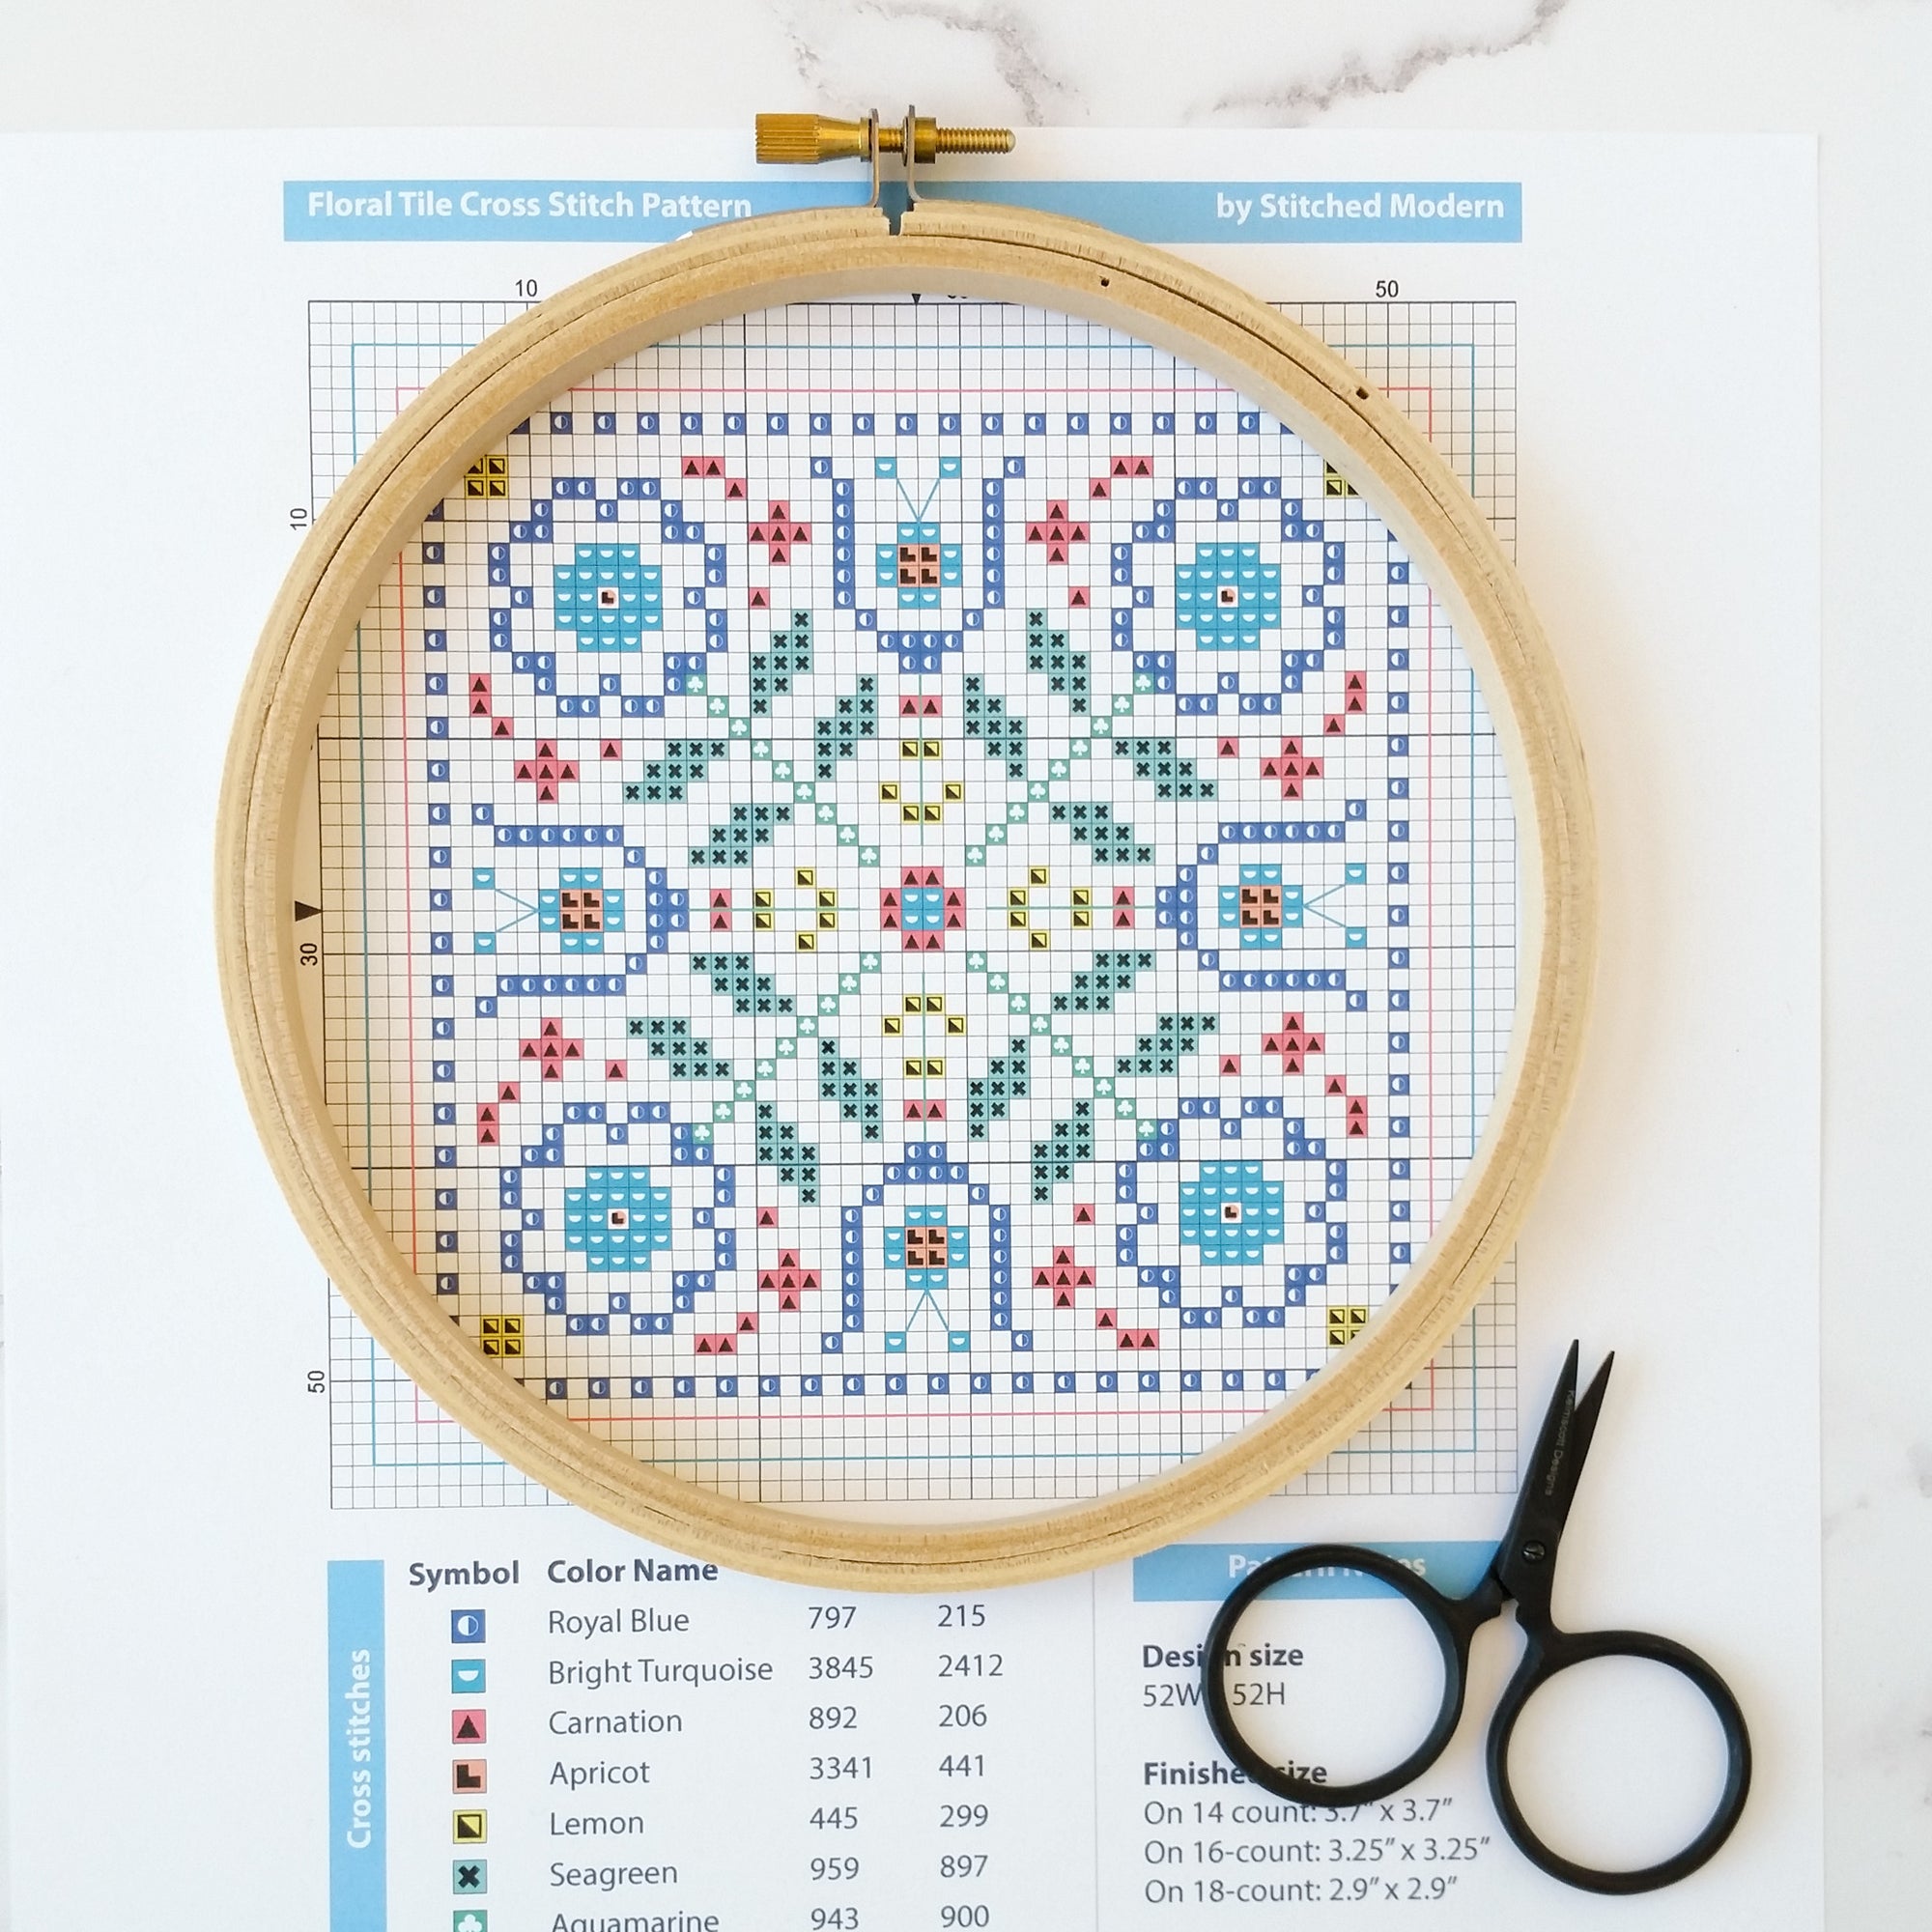 How to read a cross stitch pattern